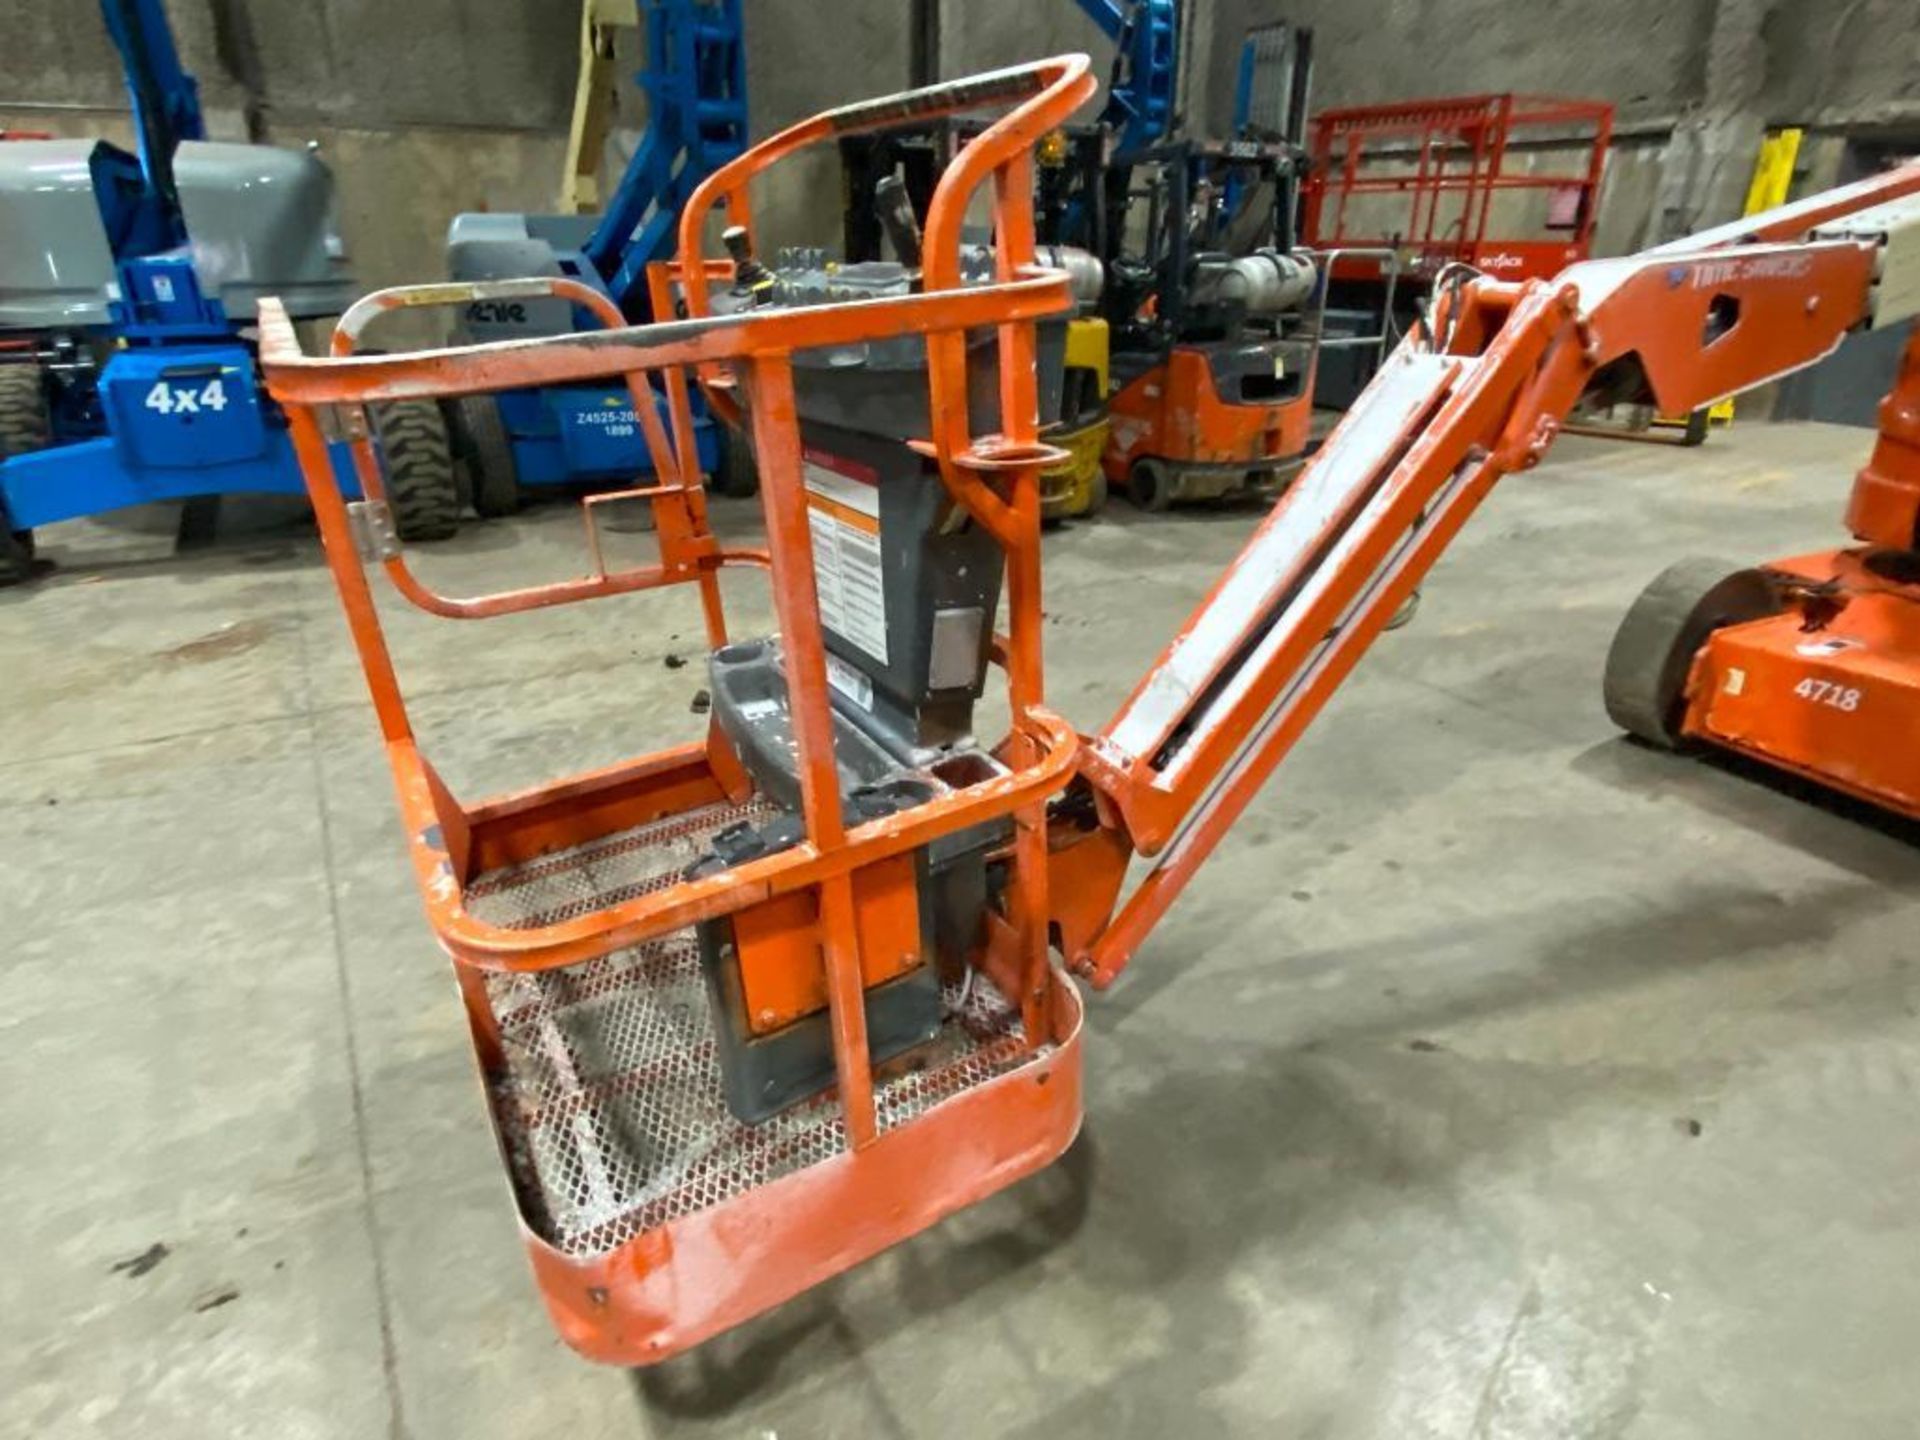 JLG E300AJP Articulating Boom Lift (S/N 300124789, Year 2008), with 29'5" Platform Height, 30" x 48" - Image 6 of 12